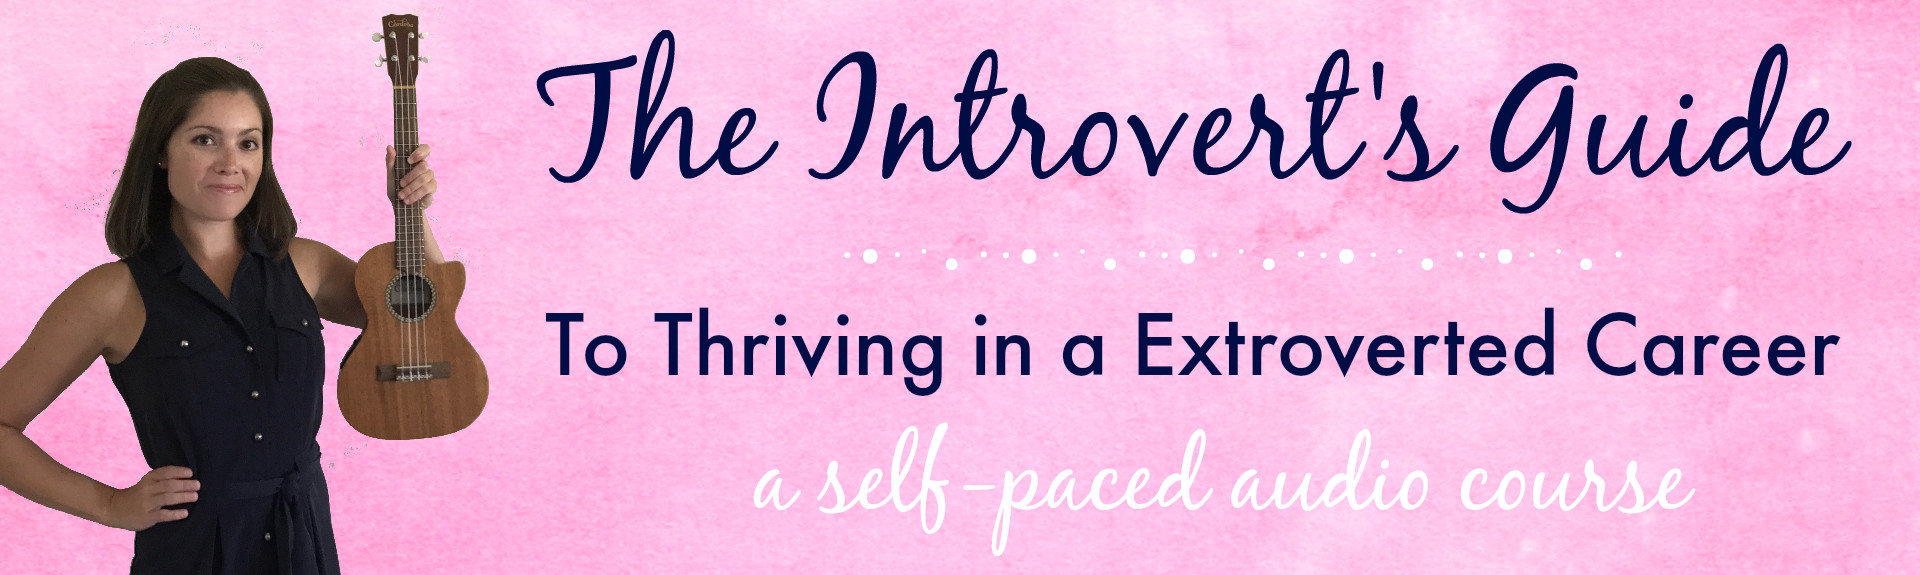 The Introvert's Guide to Thriving in an Extroverted Career | Continuing Music Therapy Education Course